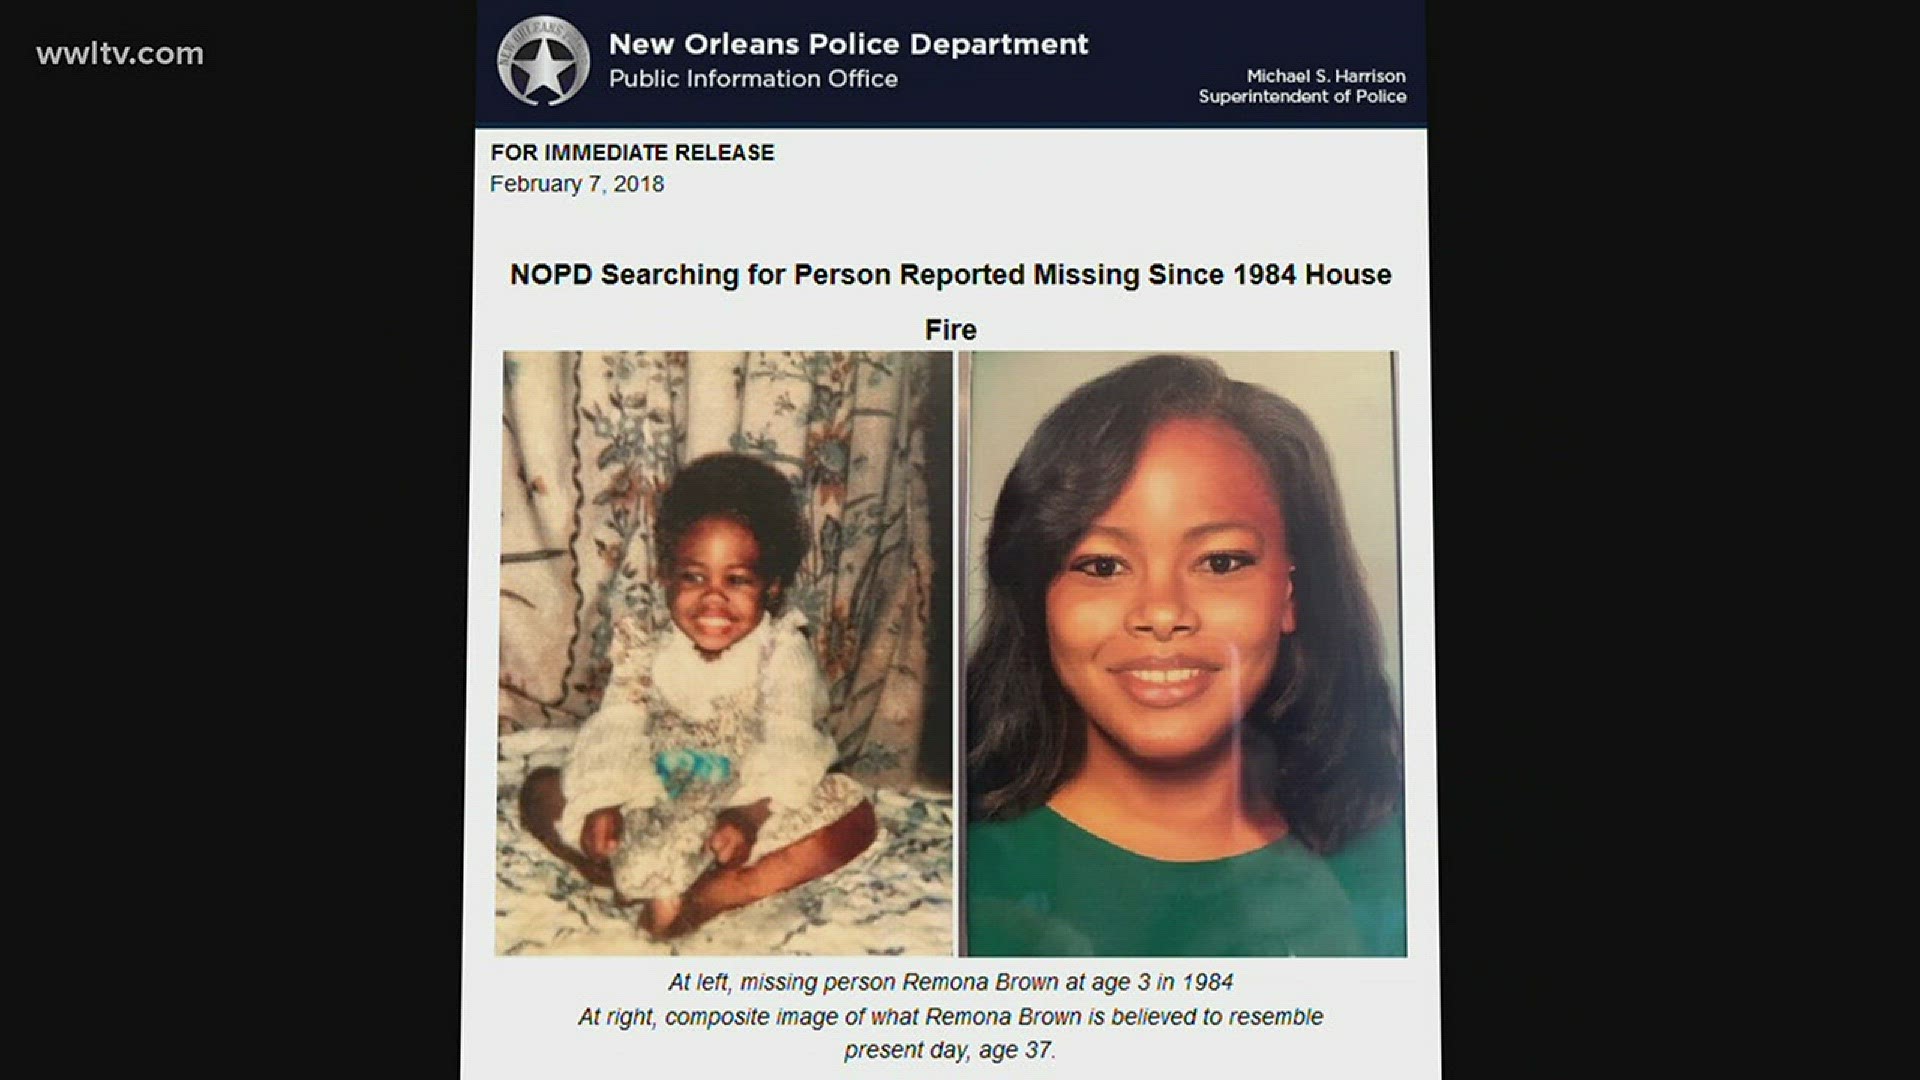 While a joint NOPD and New Orleans Fire Department task force searched for the girl's remains for four days after the fire, the case was never transferred over to the NOPD for investigation as a possible kidnapping or a homicide.